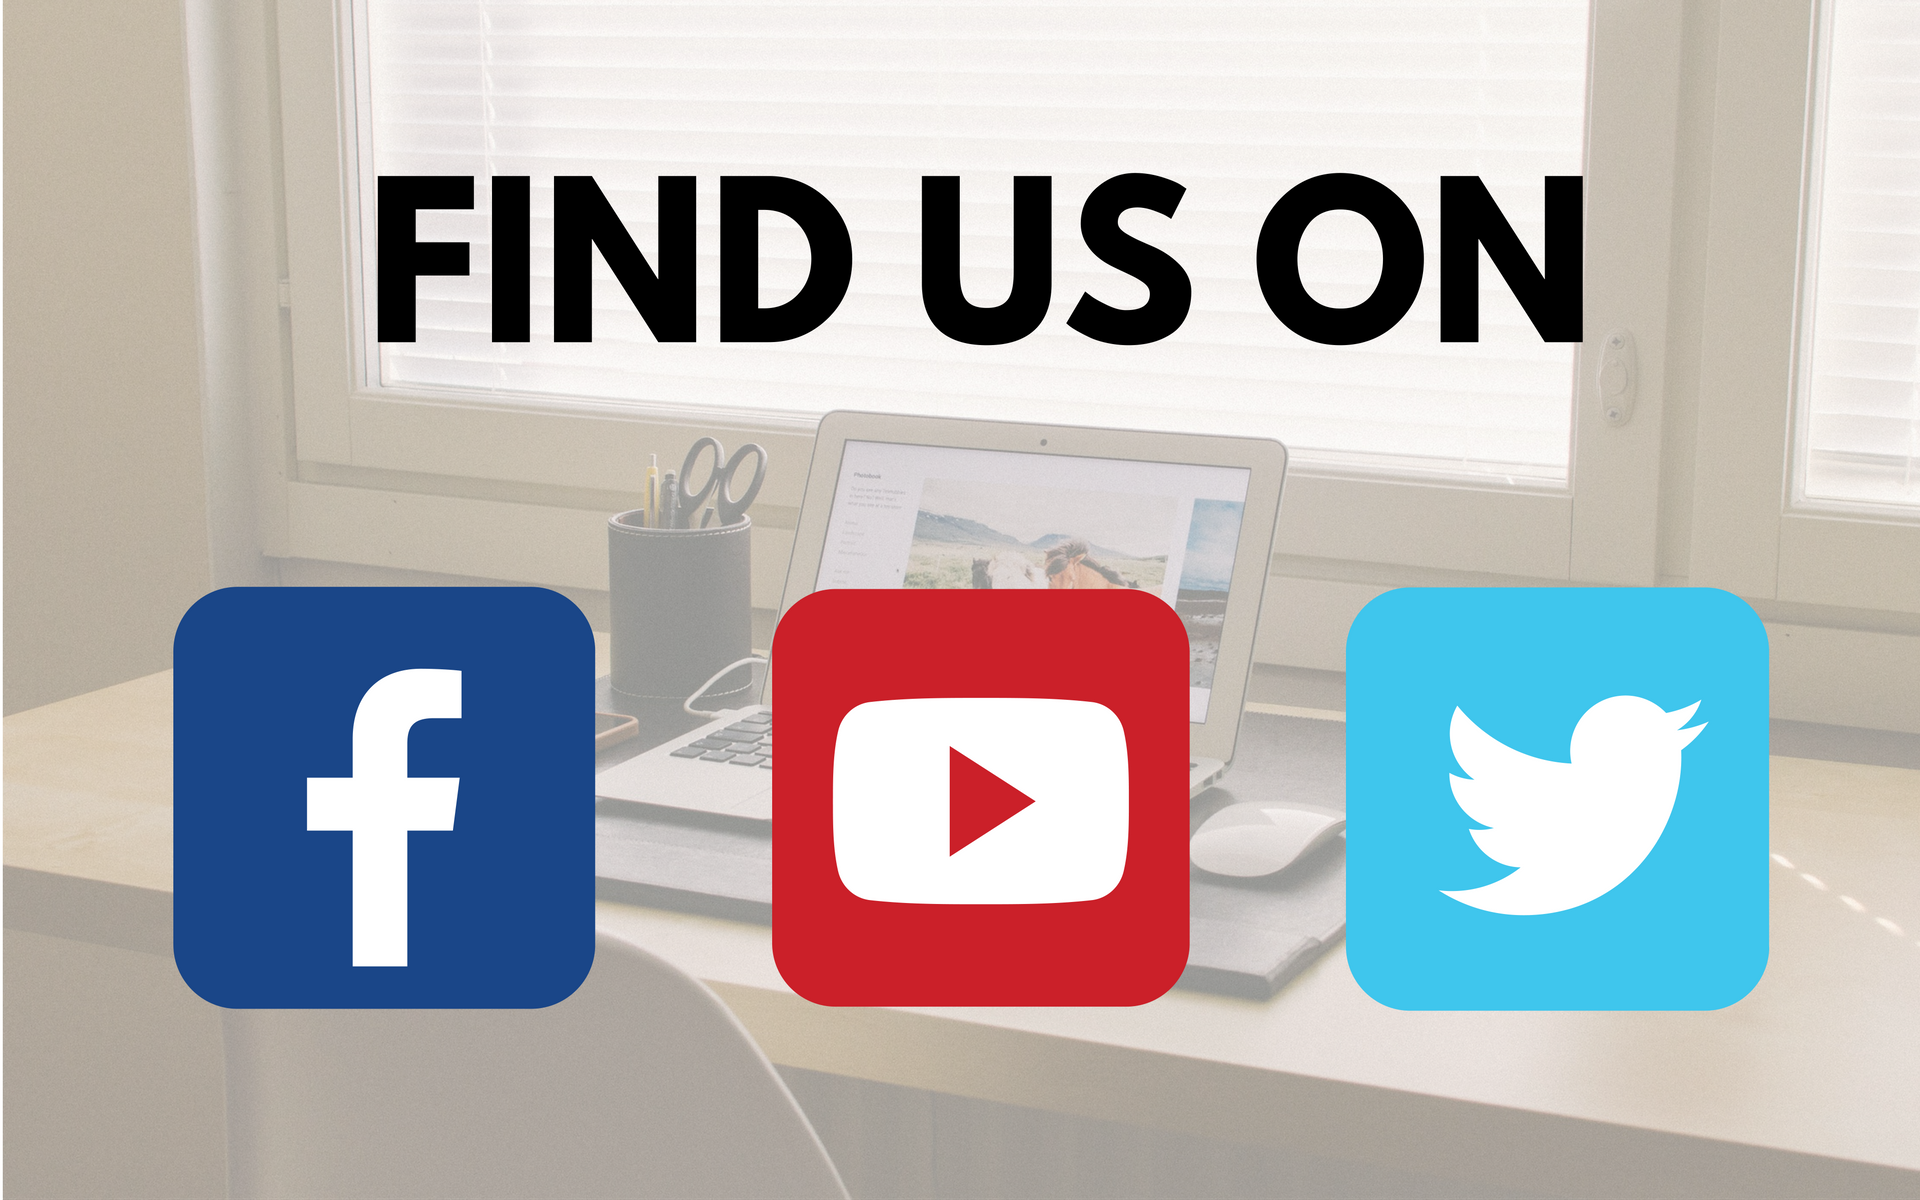 Find us on: Facebook, Youtube, Twitter